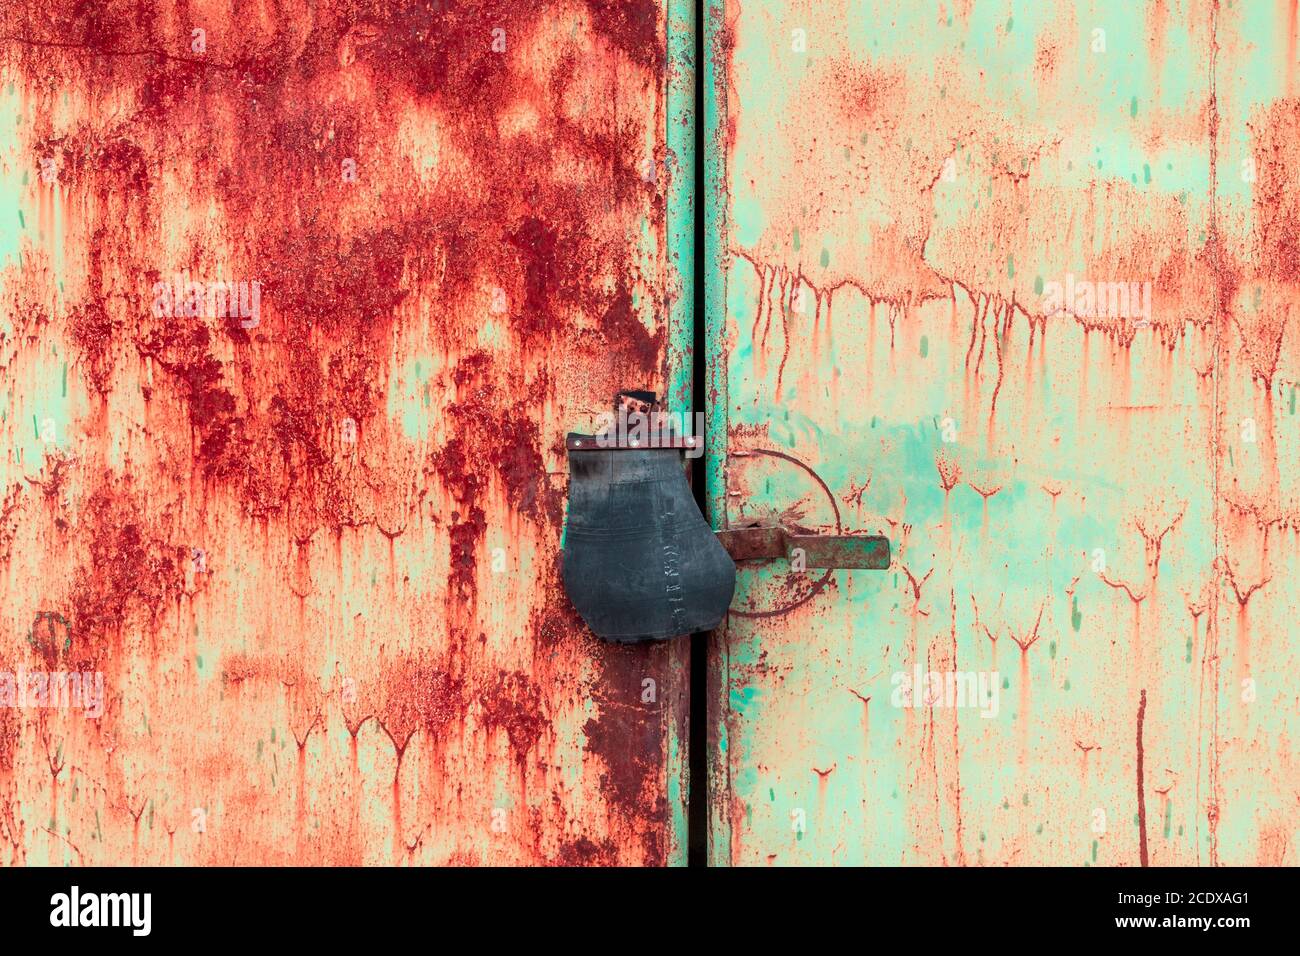 Close up of padlock and old metal hasp and staple on an rusty metal door Stock Photo